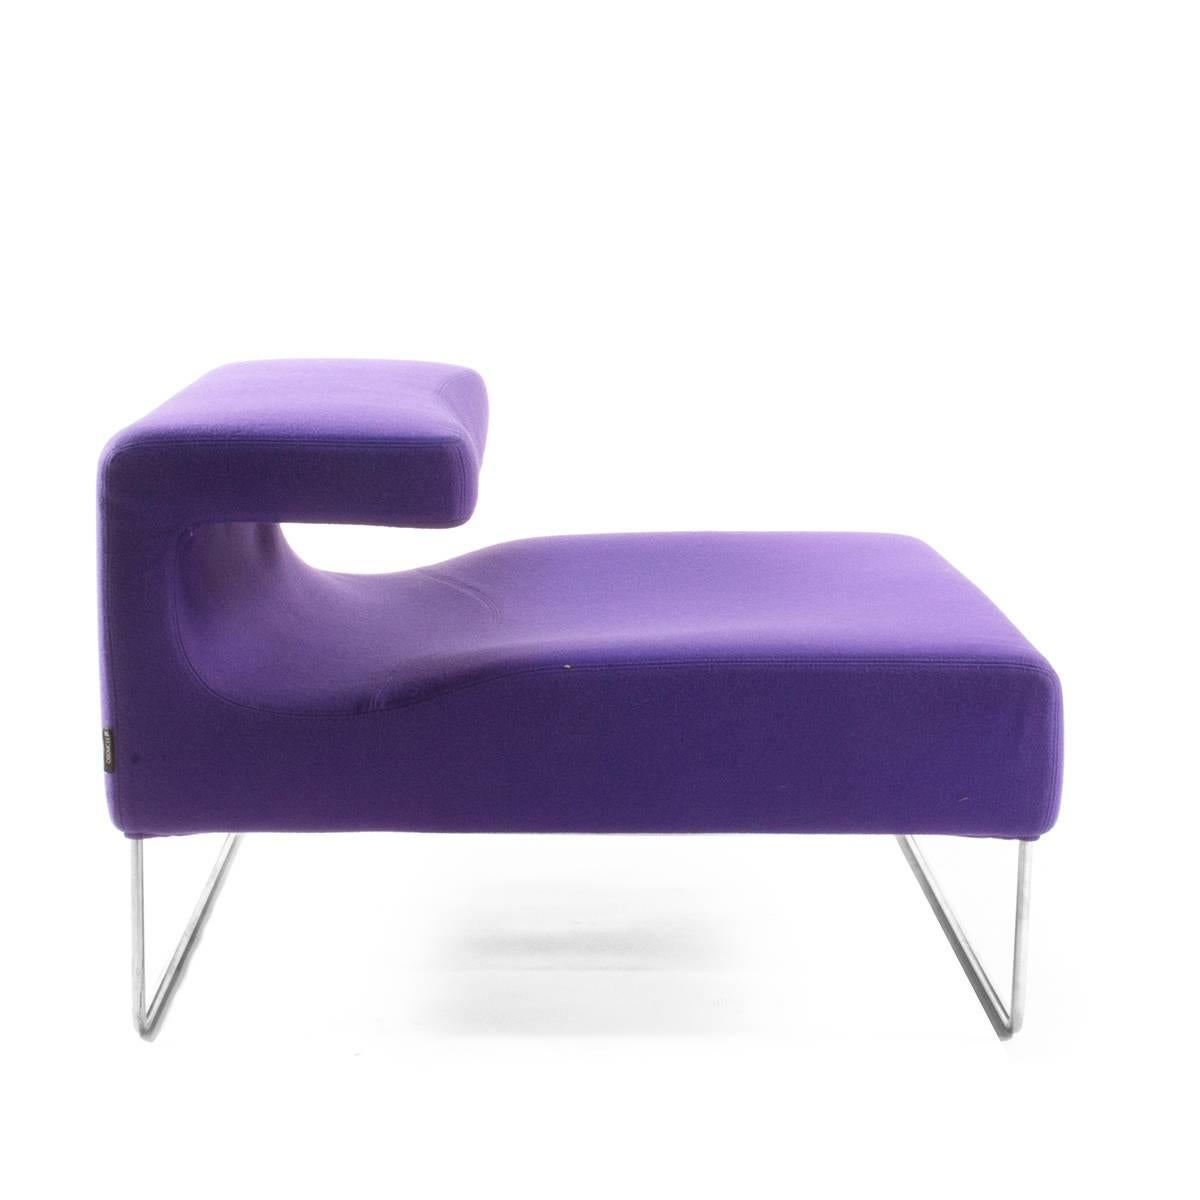 Purple Moroso Chaise Longue Lowseat Chair by Patricia Urquiola, Italy In Good Condition For Sale In Brooklyn, NY